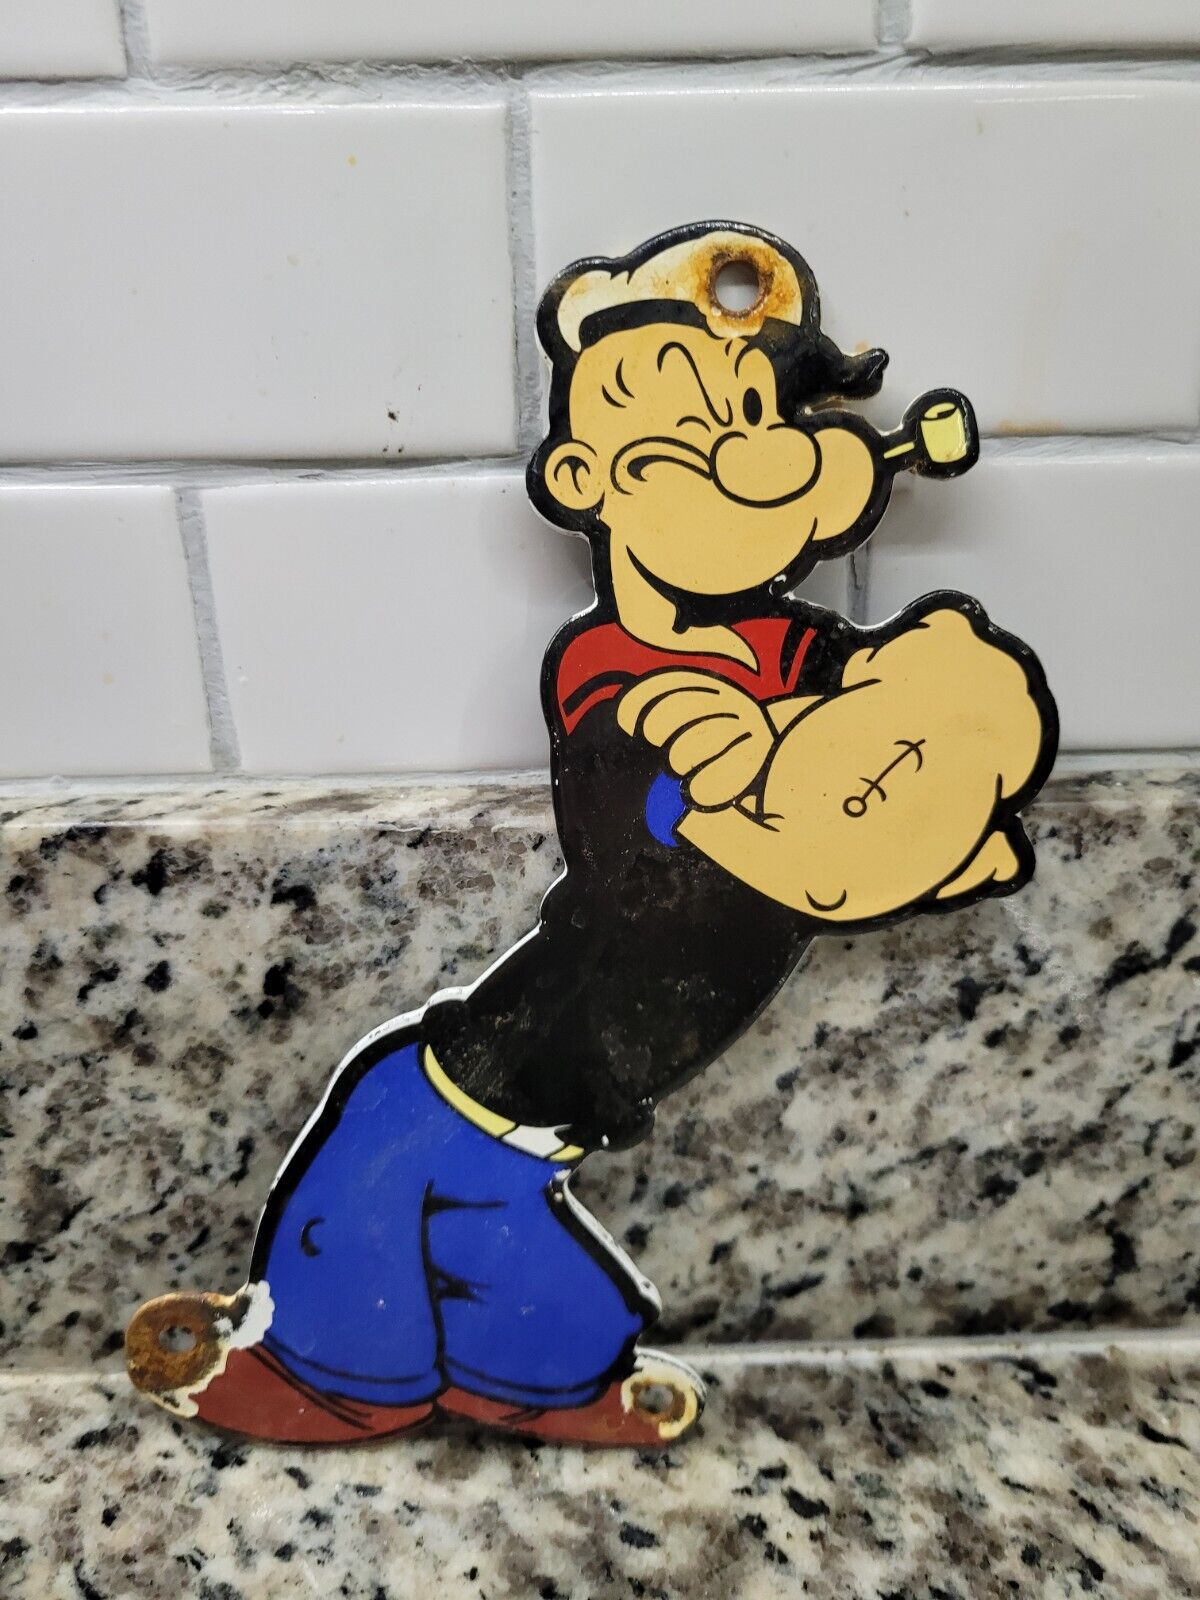 VINTAGE POPEYE THE SAILOR MAN PORCELAIN SIGN OLD TELEVISION CARTOON CHARACTER